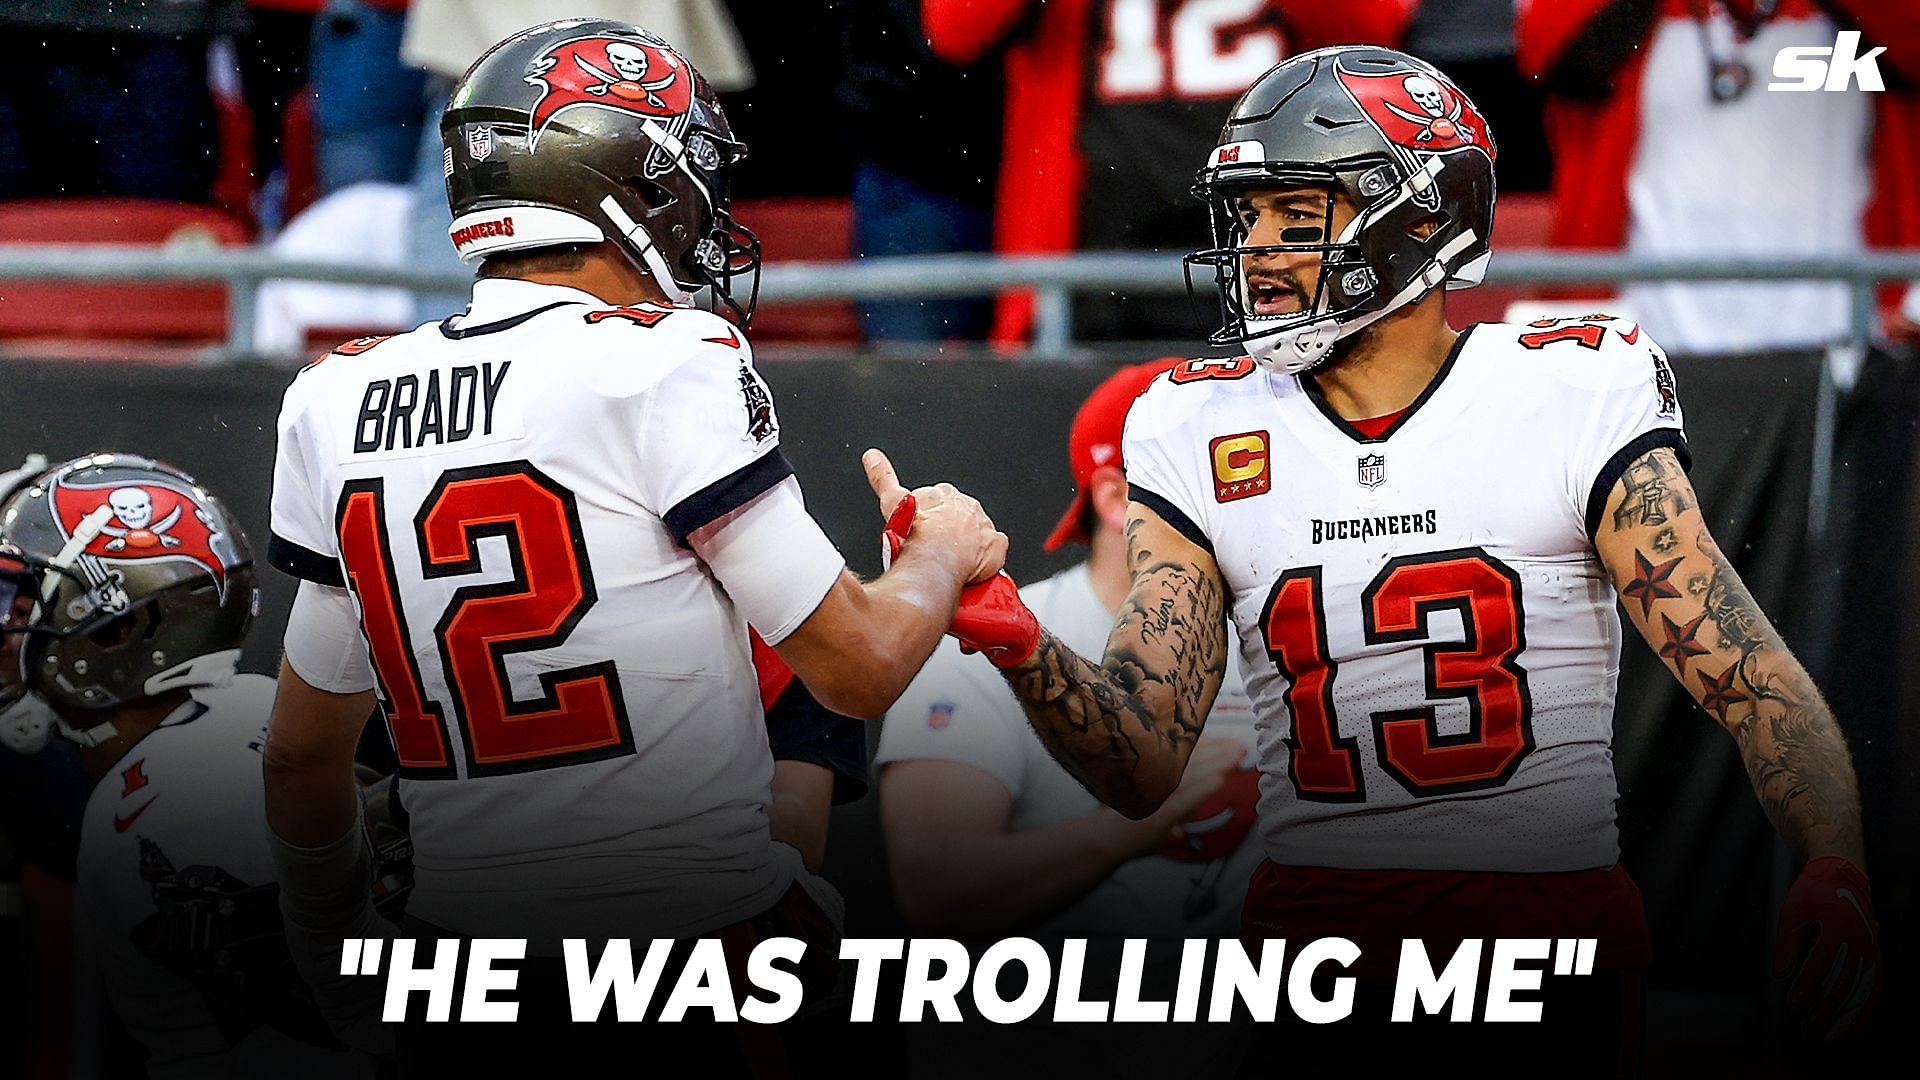 Mike Evans thought Tom Brady was trolling him on his unretiring